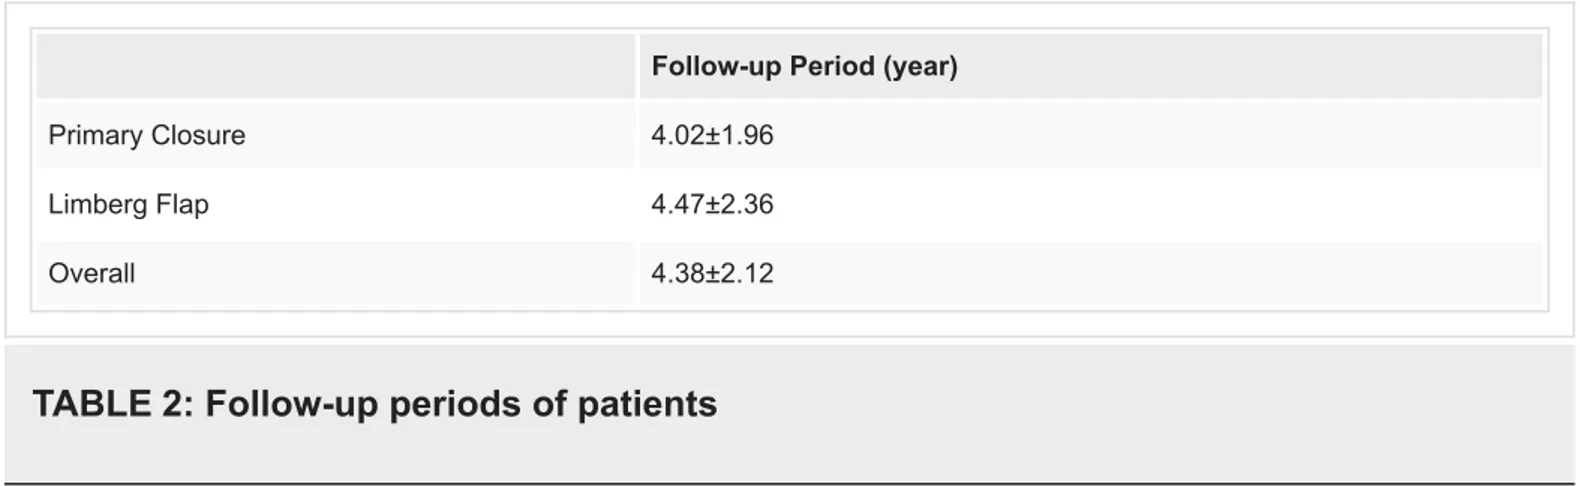 TABLE 2: Follow-up periods of patients